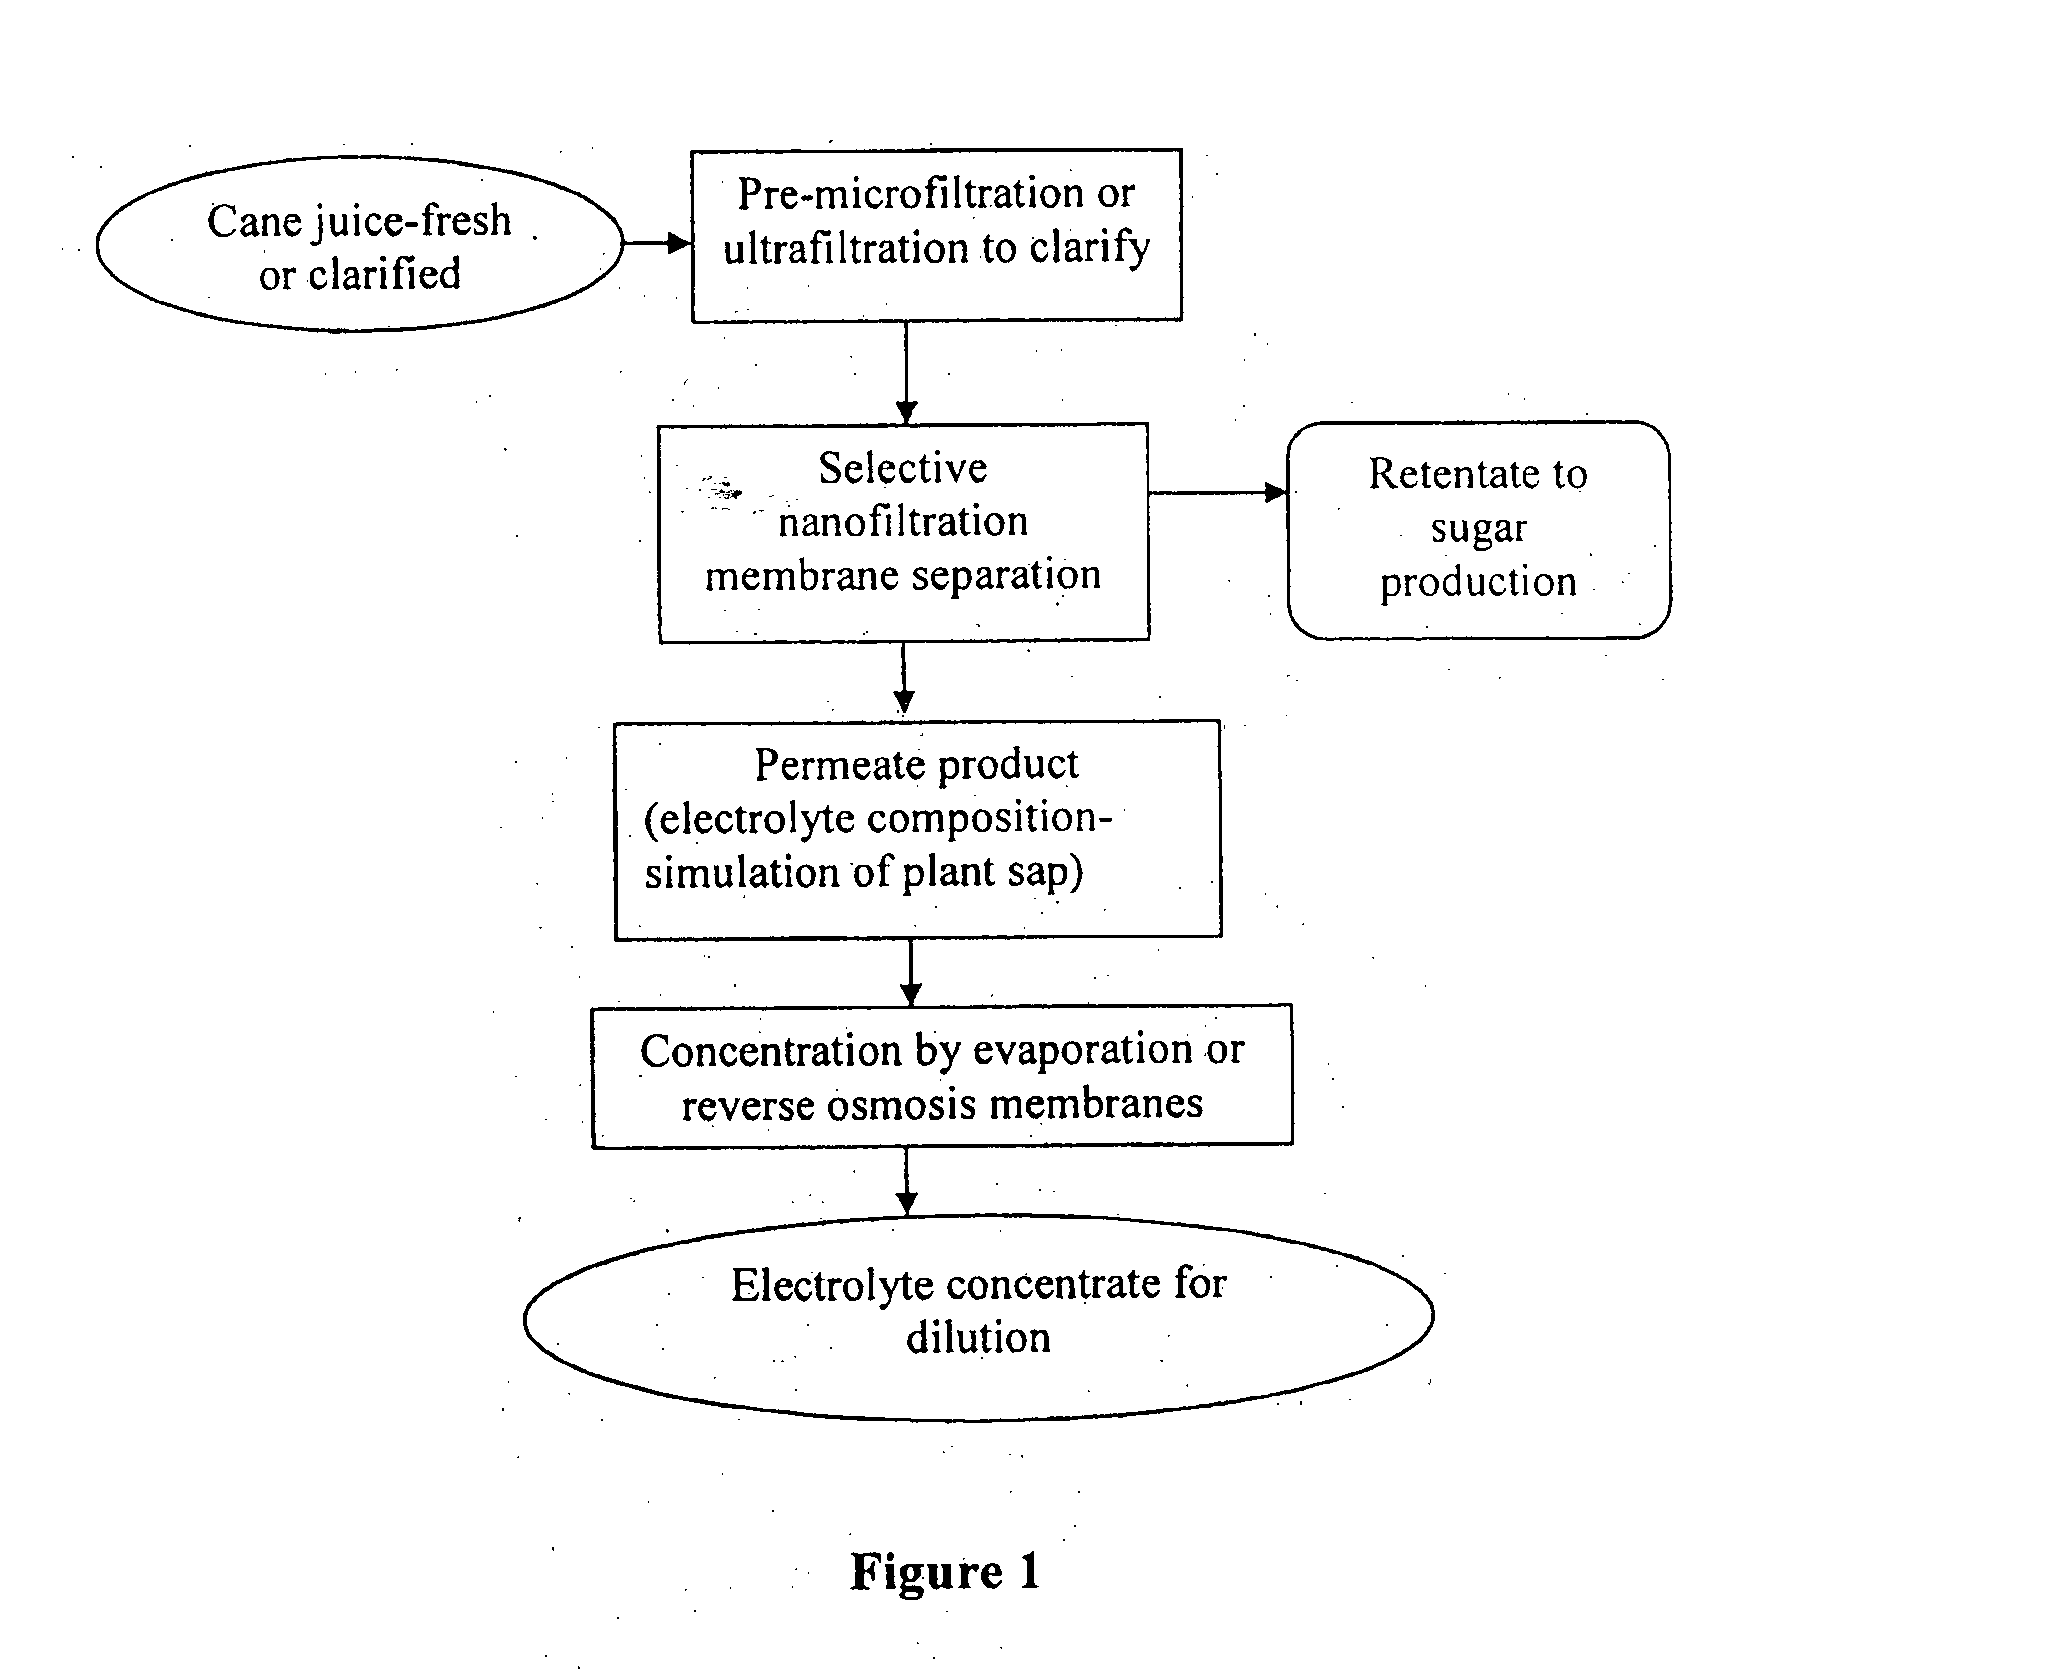 Plant-based electrolyte compositions